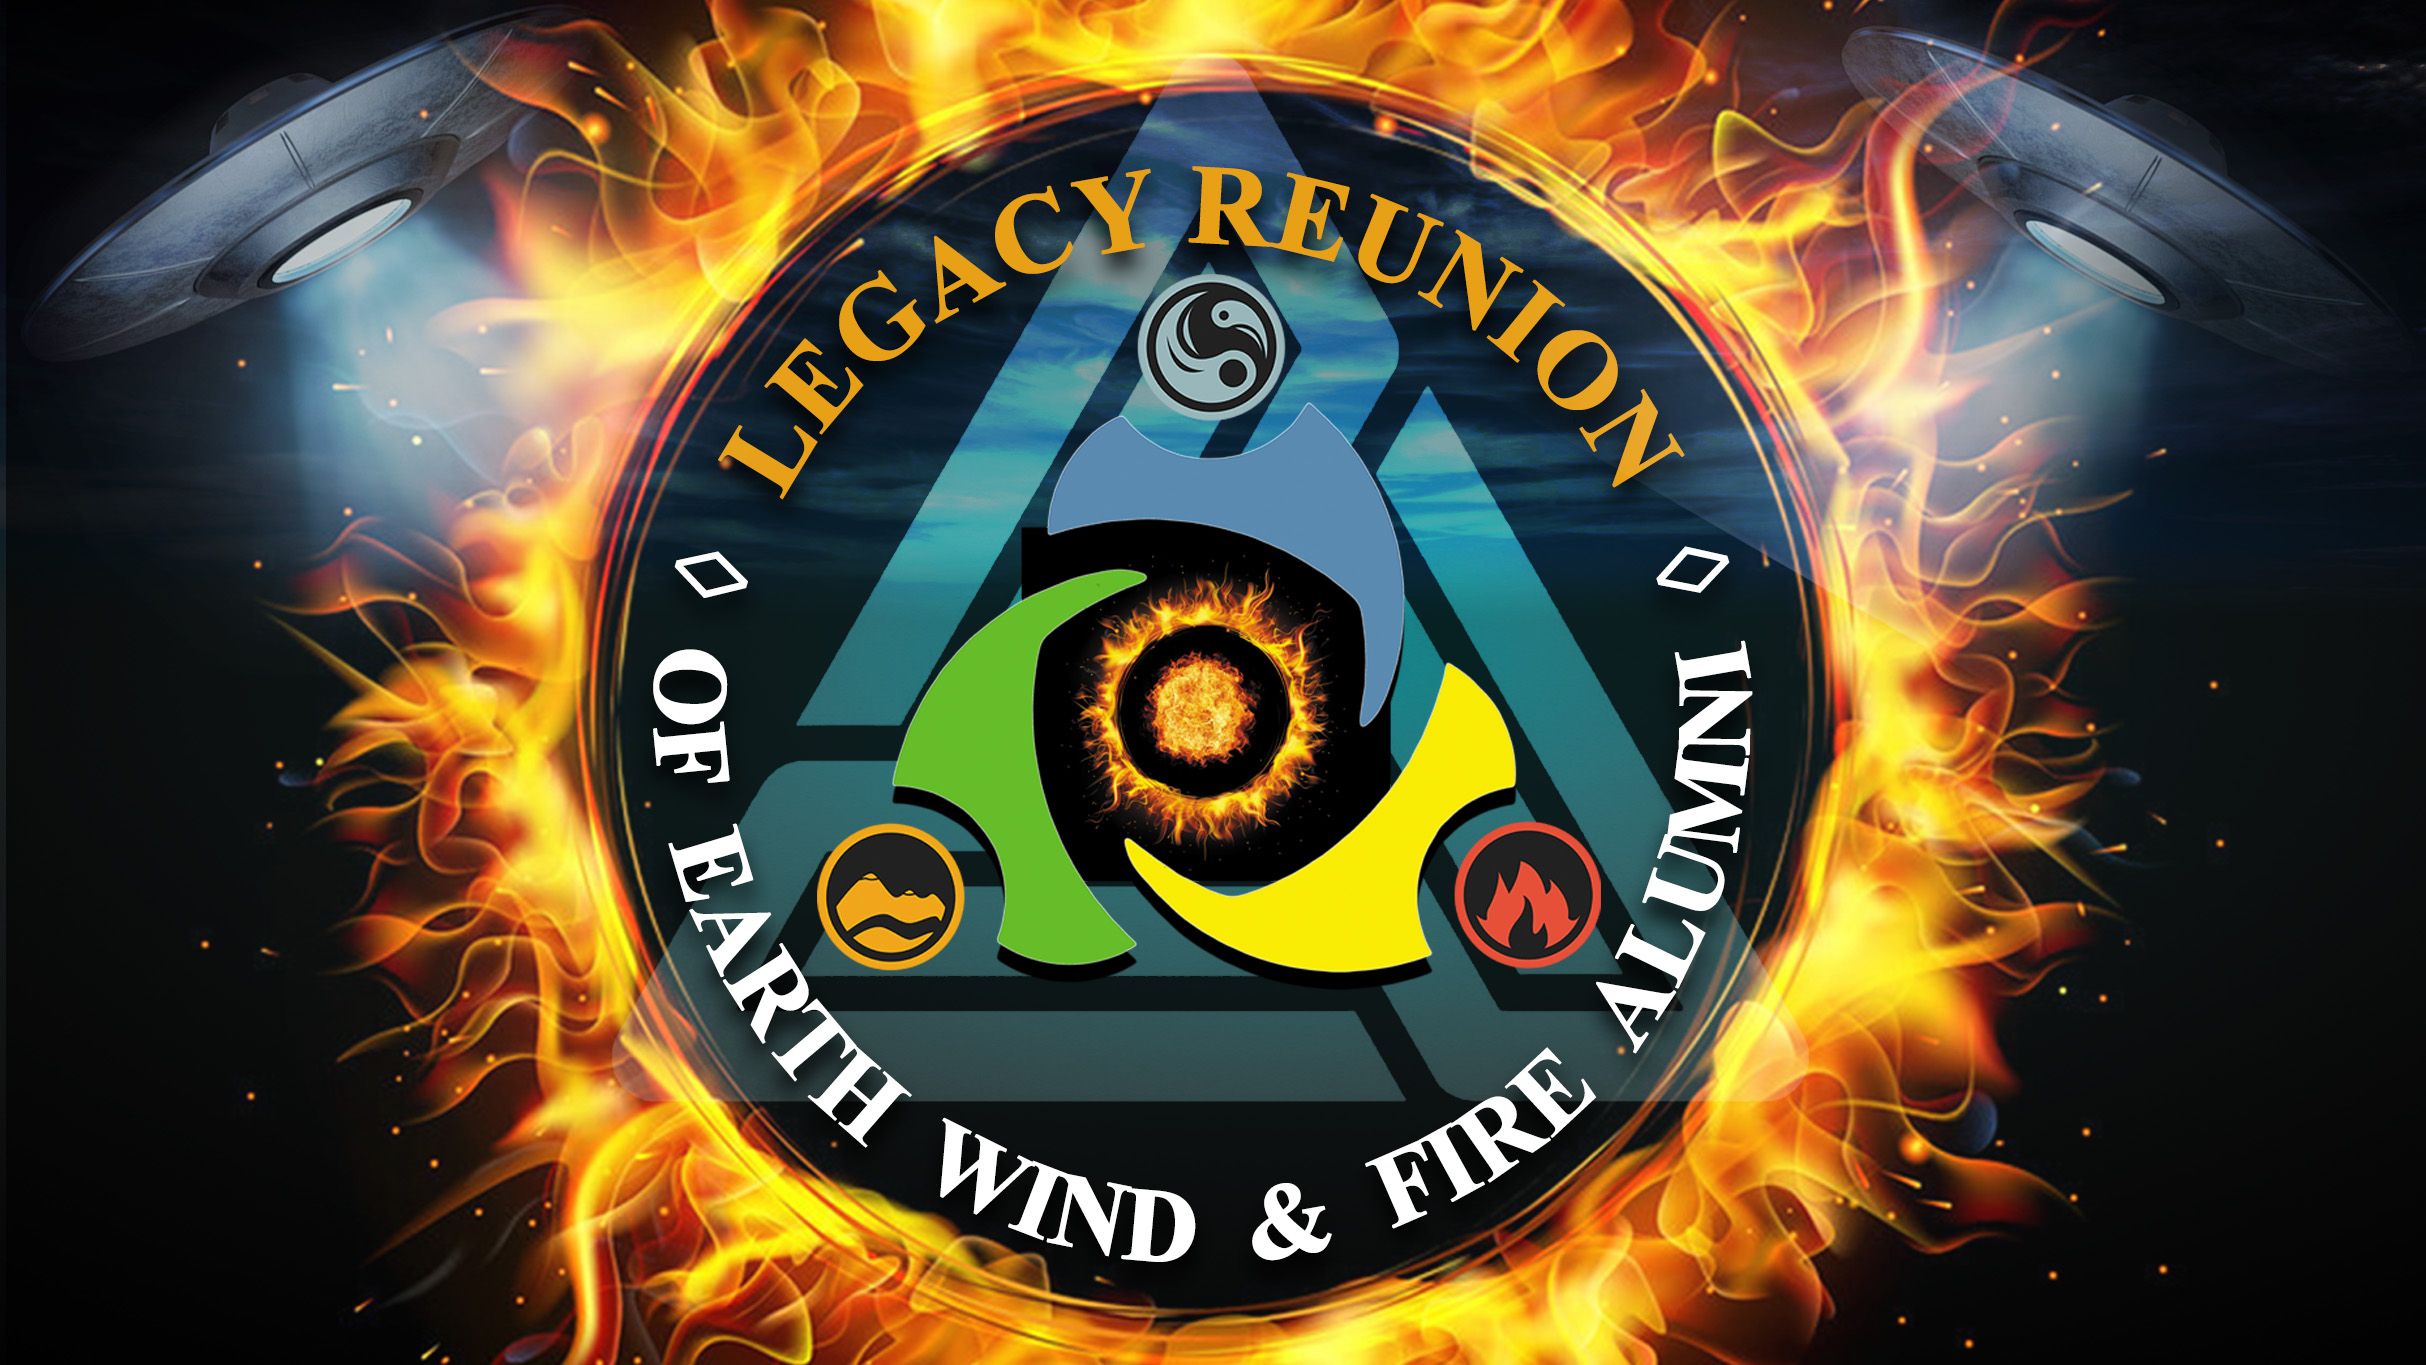 RESCHEDULED: Legacy Reunion of Earth, Wind and Fire Alumni Concert